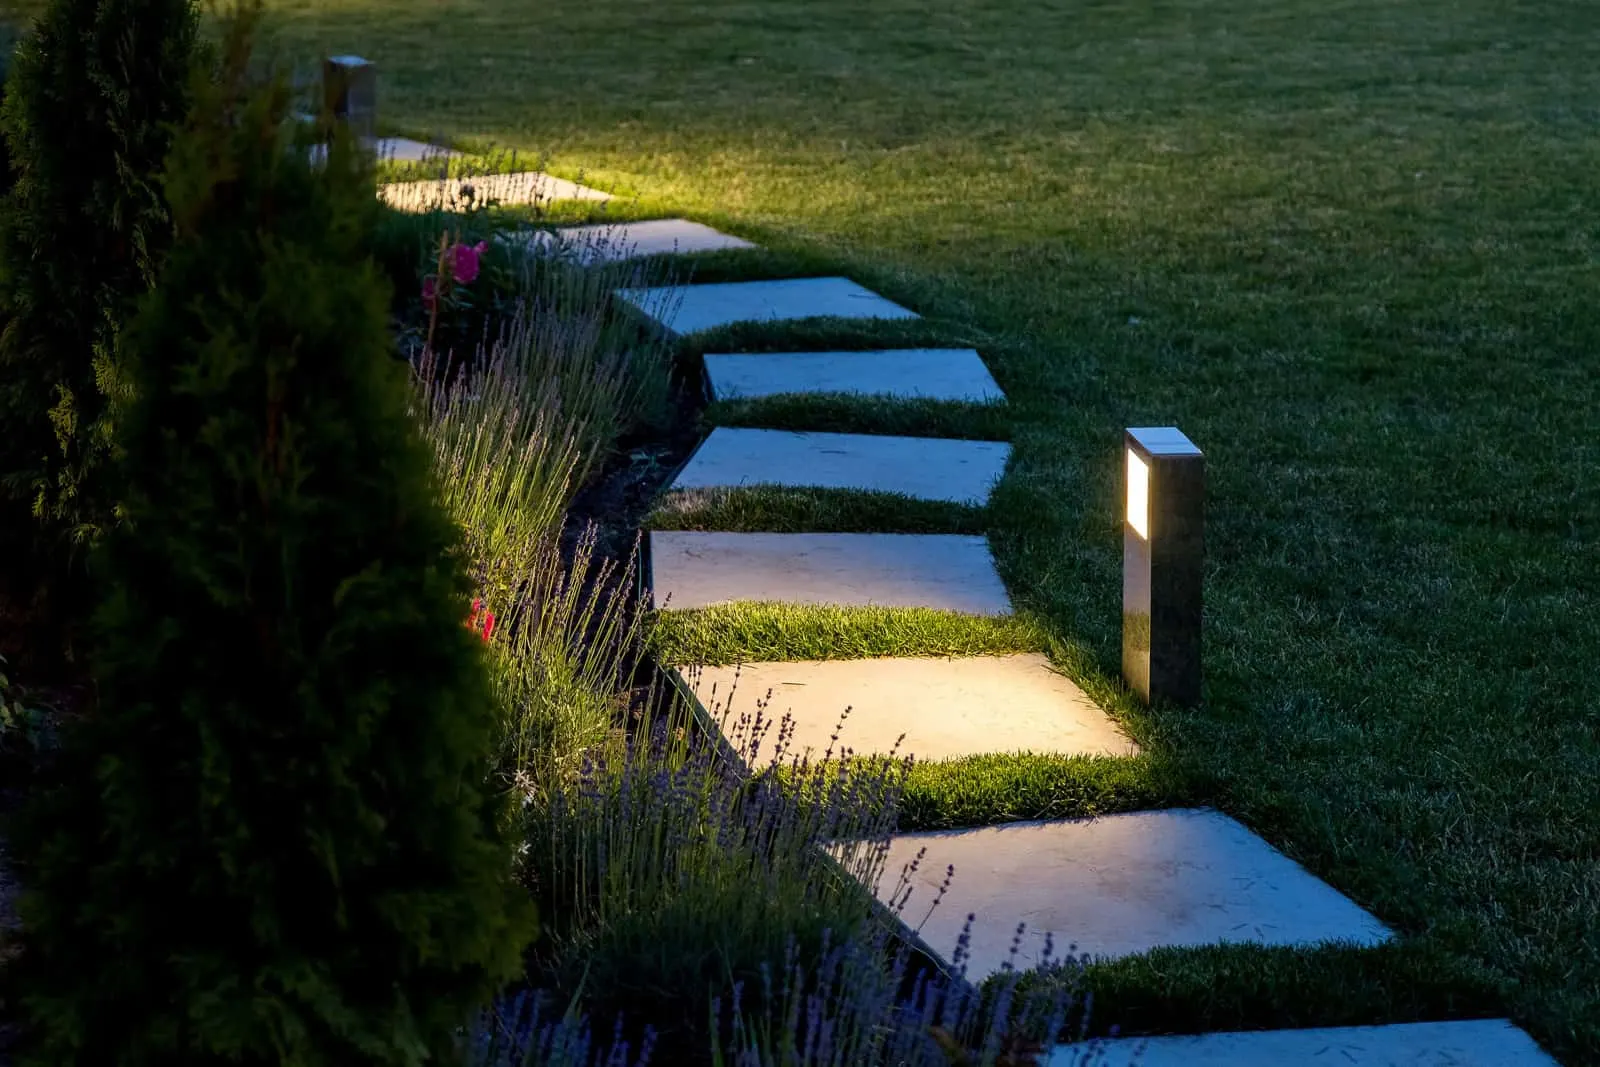 marble path of square tiles illuminated by a lantern